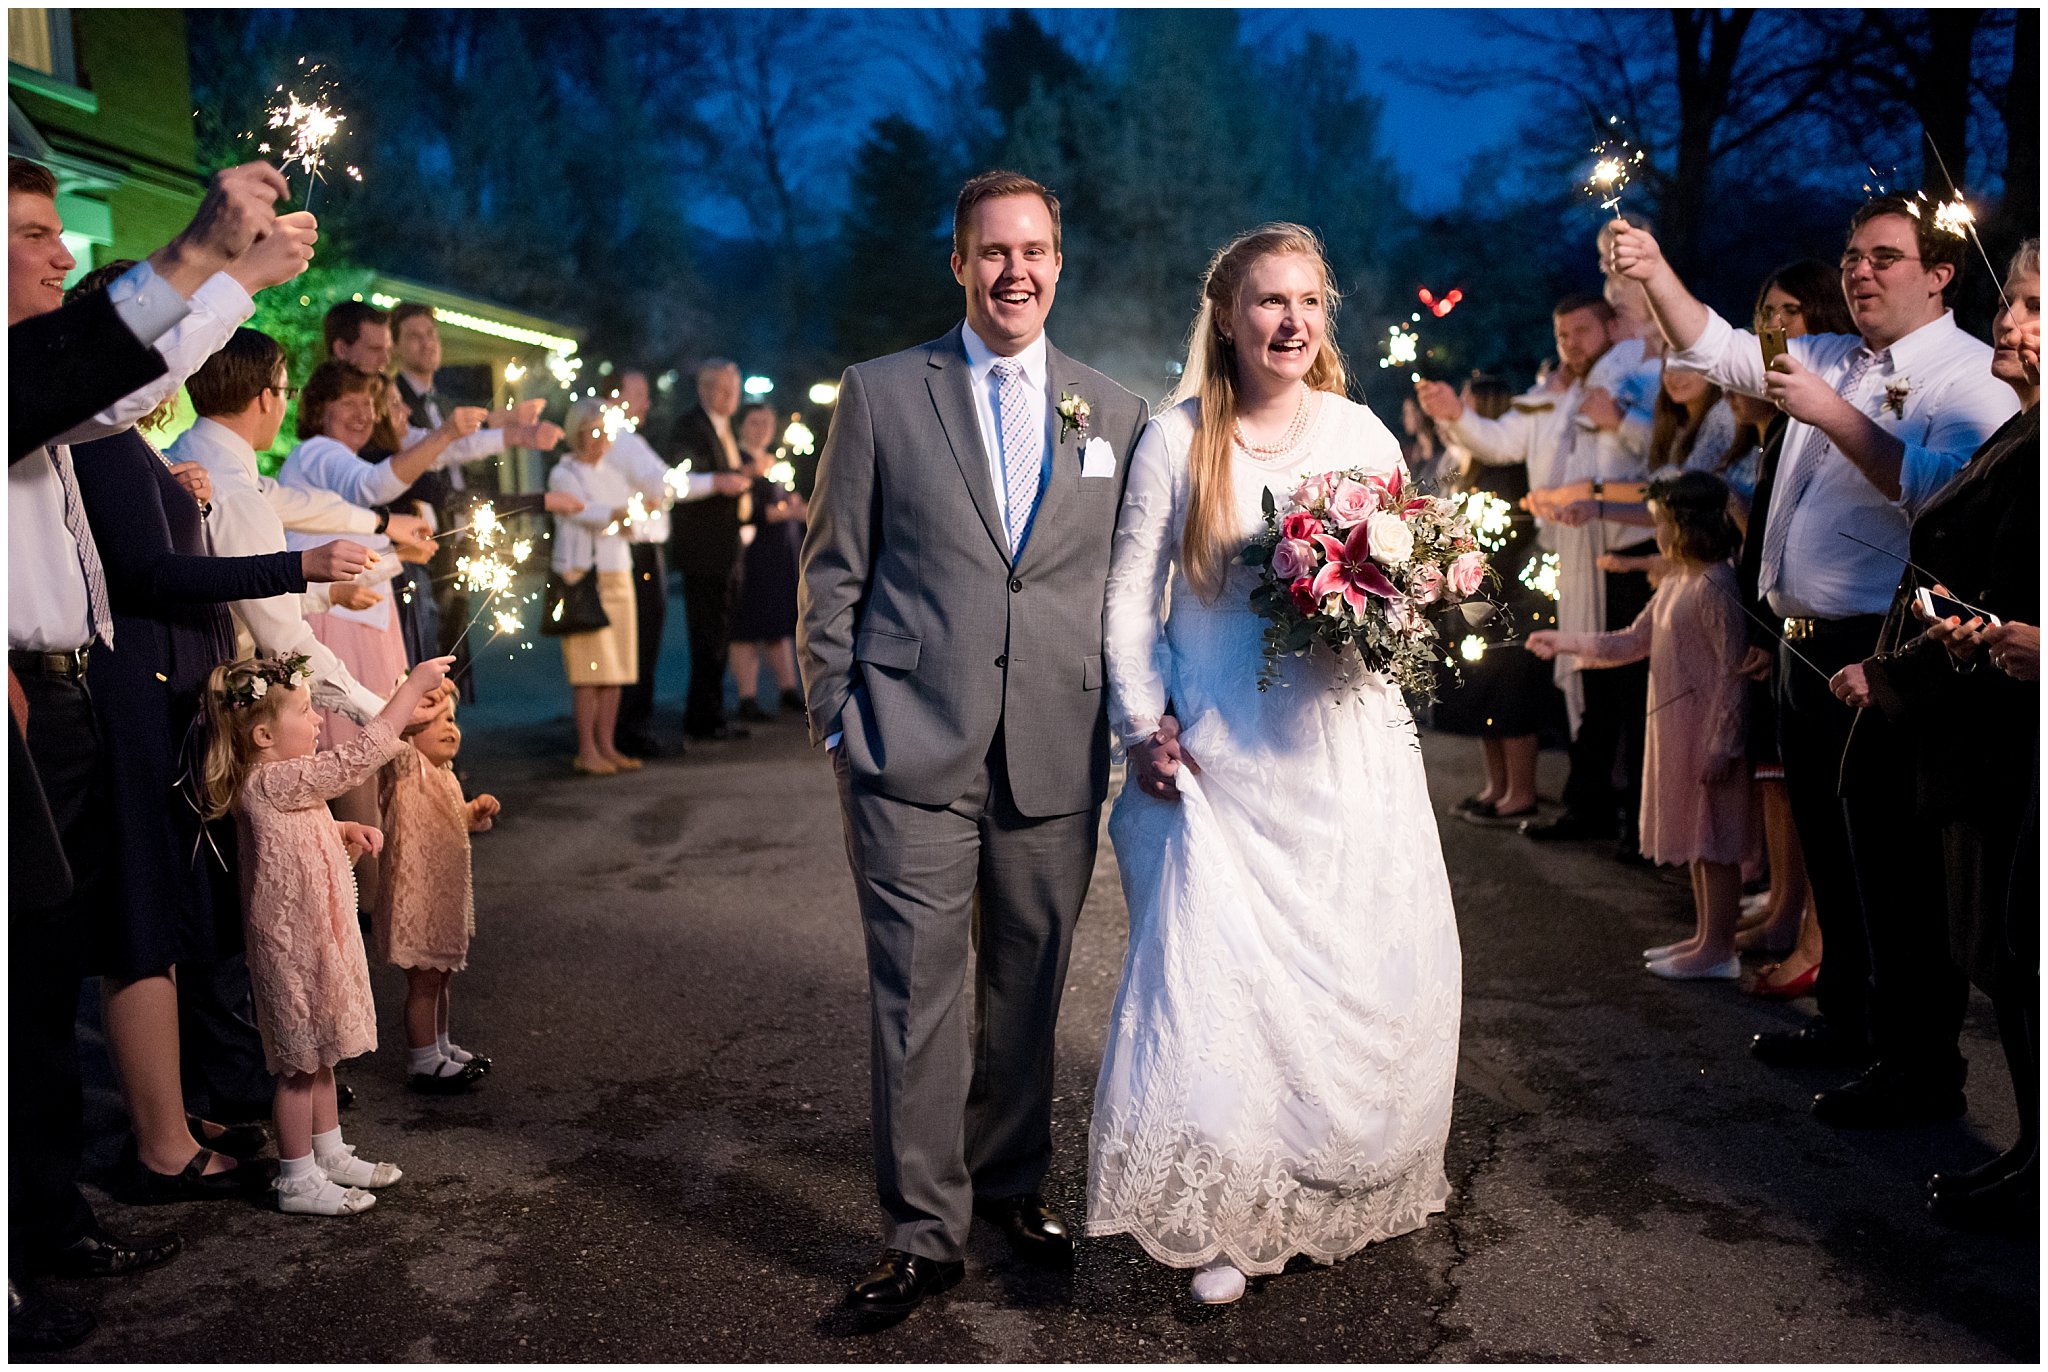 Rainy Wedding Exit at Eldredge Manor | 6 Tips for Making the Best of Rain on Your Wedding Day | Utah Wedding Photographers | Jessie and Dallin